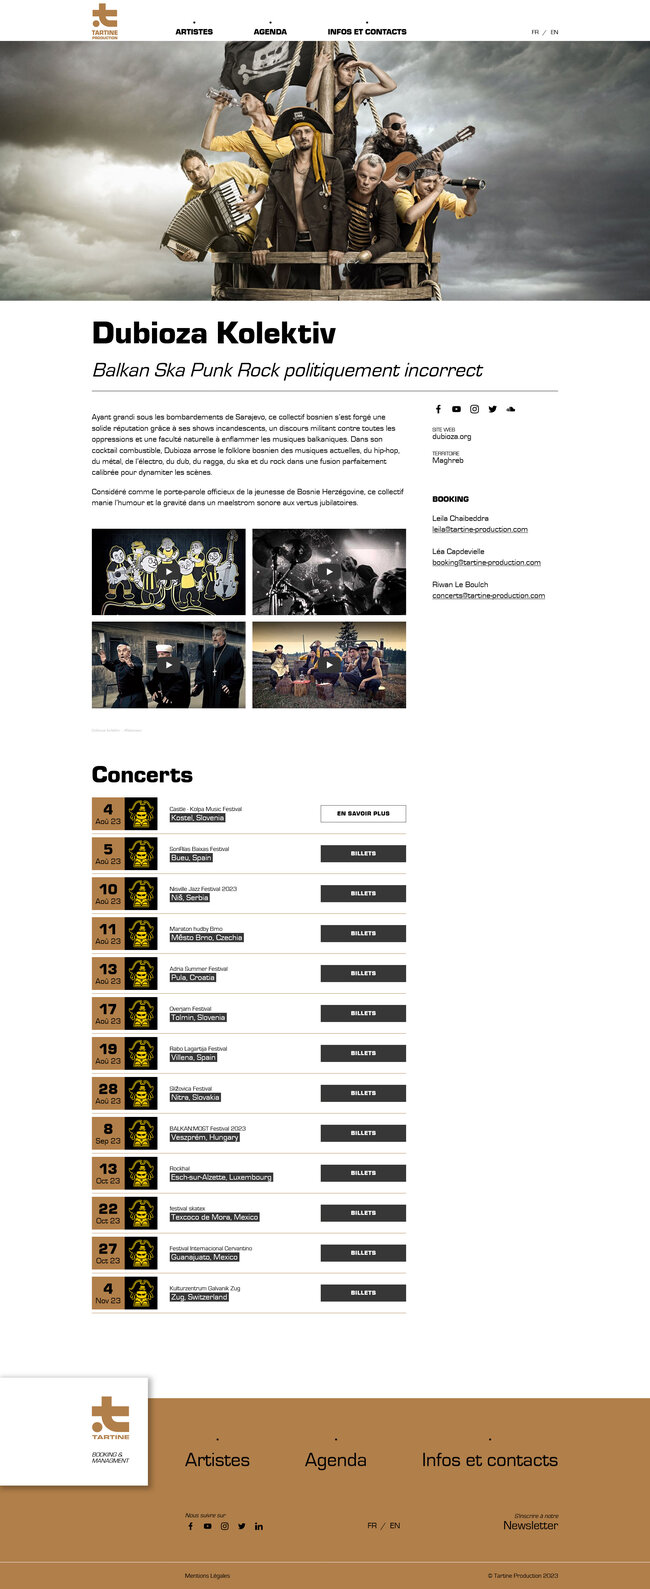 Artist presentation page with clips, booking contacts and list of concert dates